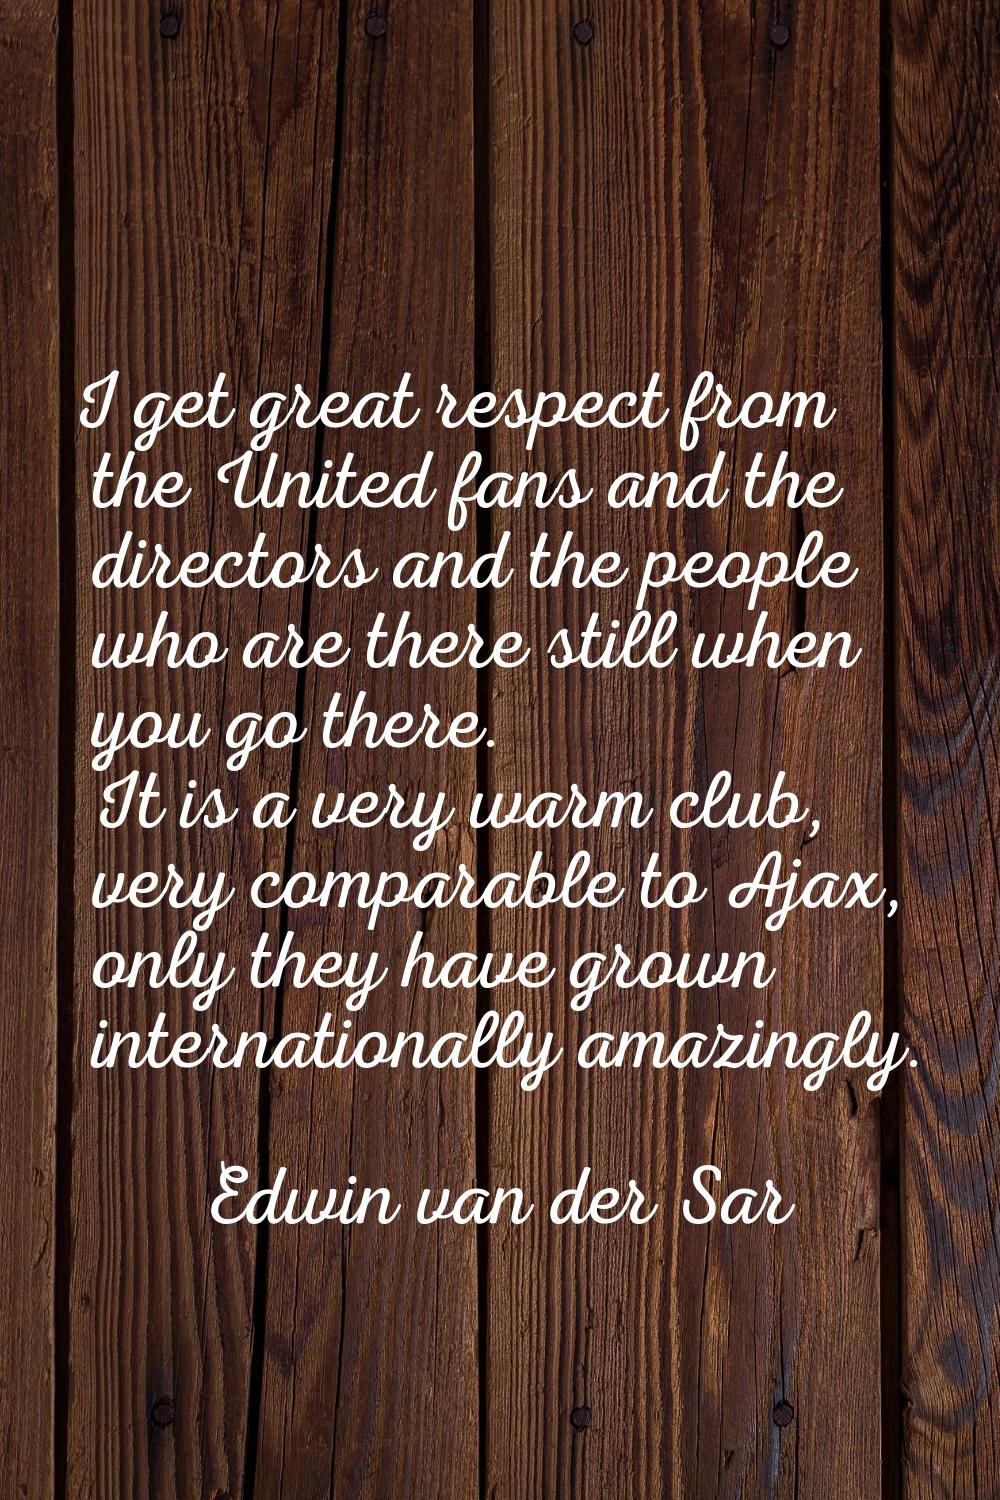 I get great respect from the United fans and the directors and the people who are there still when 